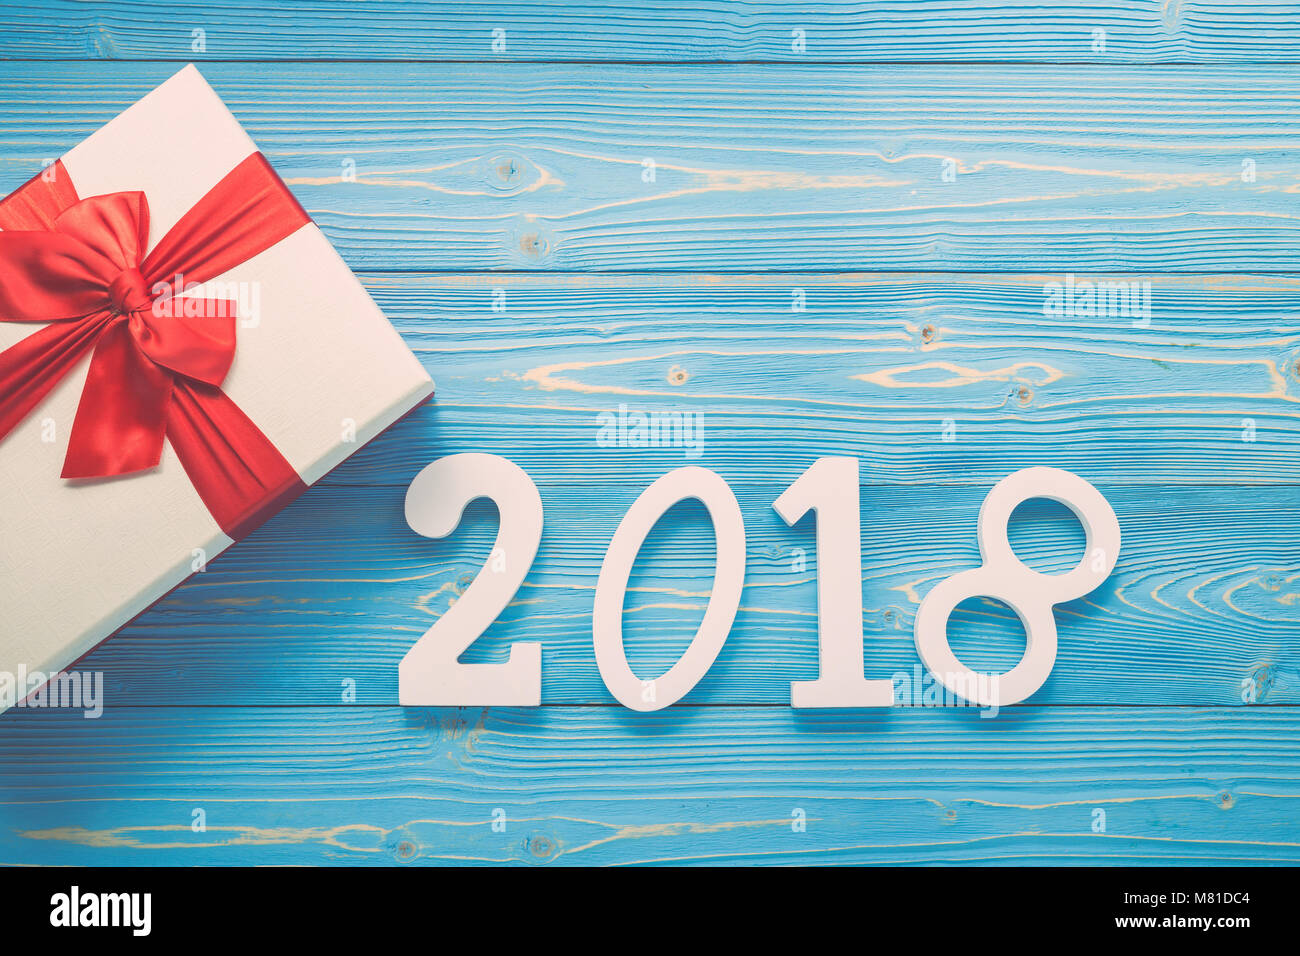 White new year or Christmas gift box with red ribbon for holiday concept on blue wooden board. Top view with empty space for text and design Stock Photo